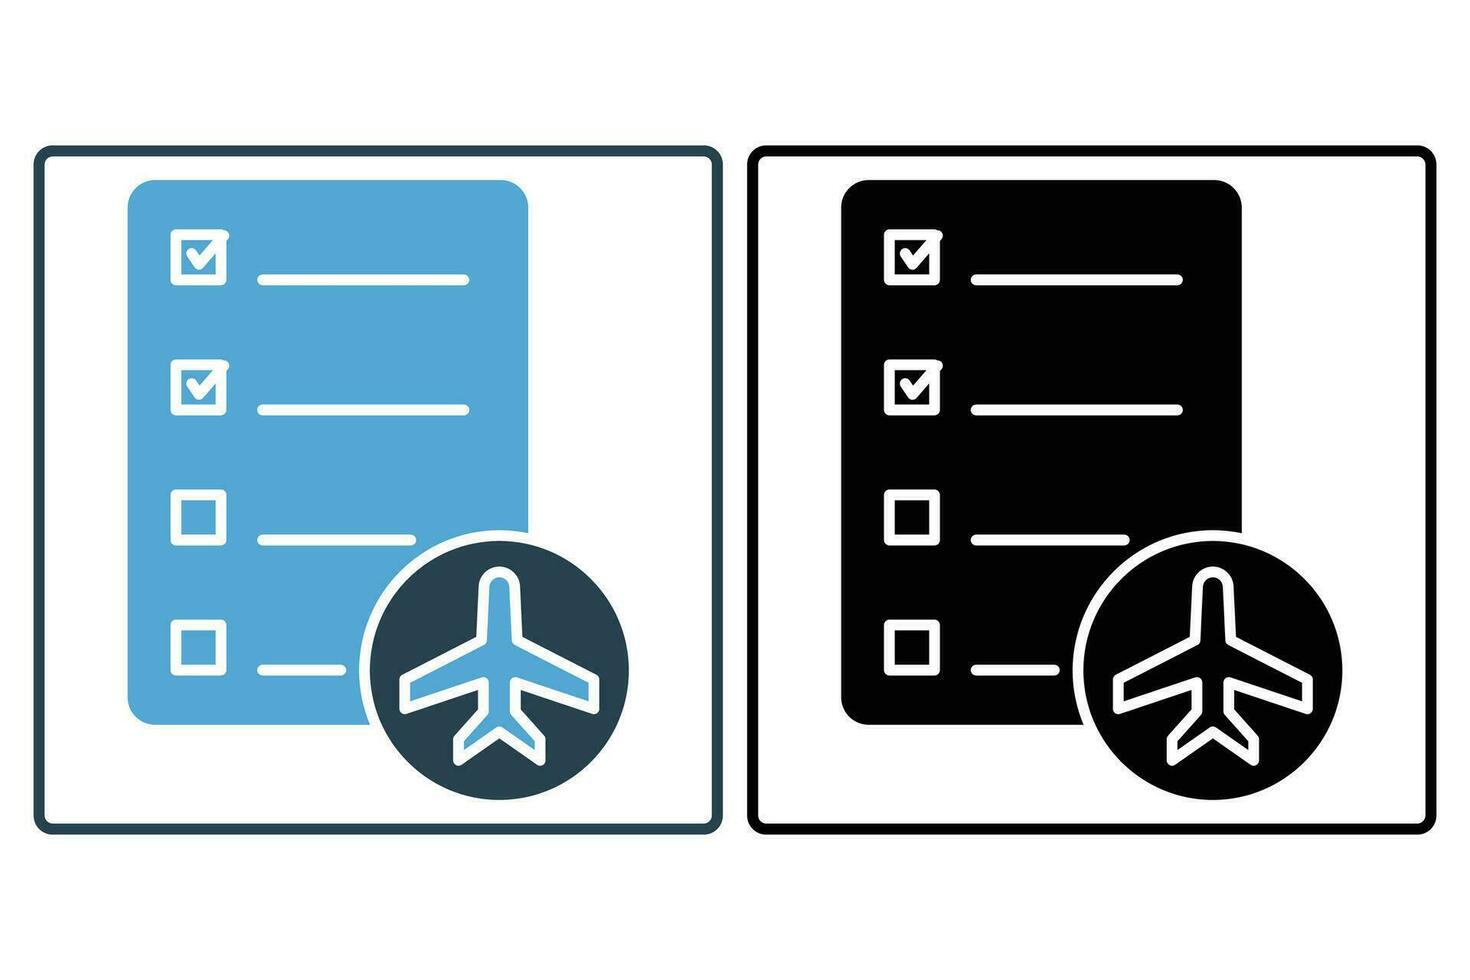 travel itinerary icon. checkmark with airplane. icon related to travel, planned travel schedule. solid icon style. element illustration vector